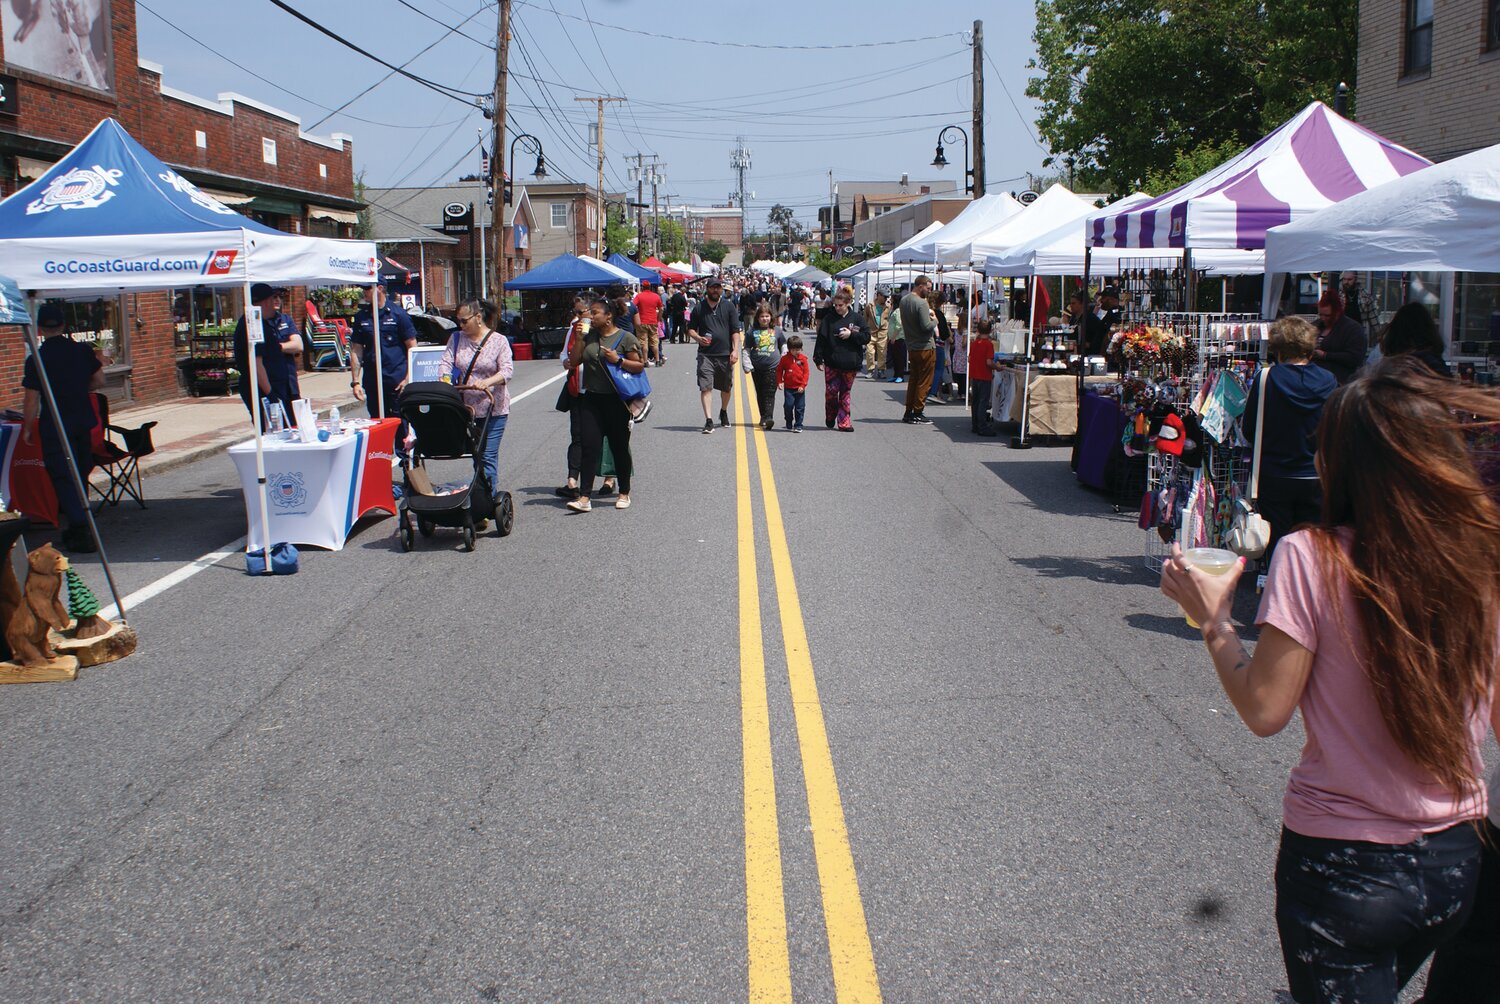 THE PATH MOST TAKEN: The entire street was closed down to accommodate the numerous vendors and give people a chance to safely walk the road with their children. Traffic and parking was still allowed on side streets so that all businesses on Rolfe Square could stay open during the festival.